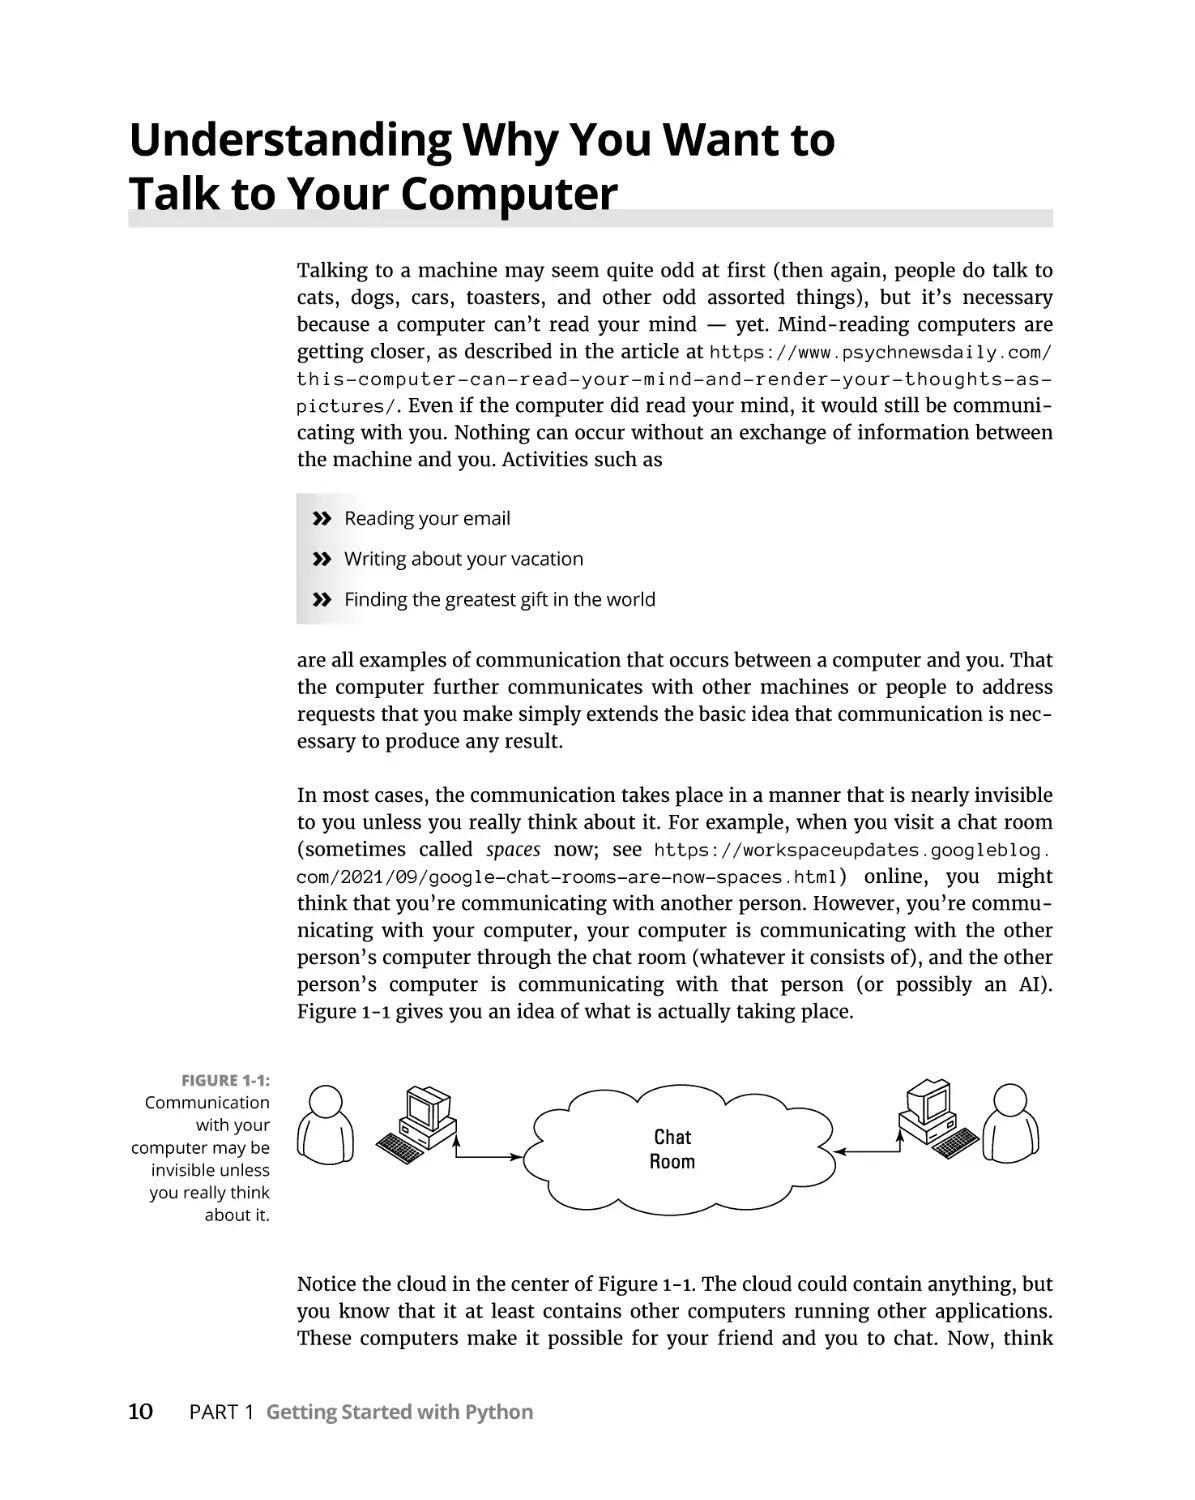 Understanding Why You Want to Talk to Your Computer